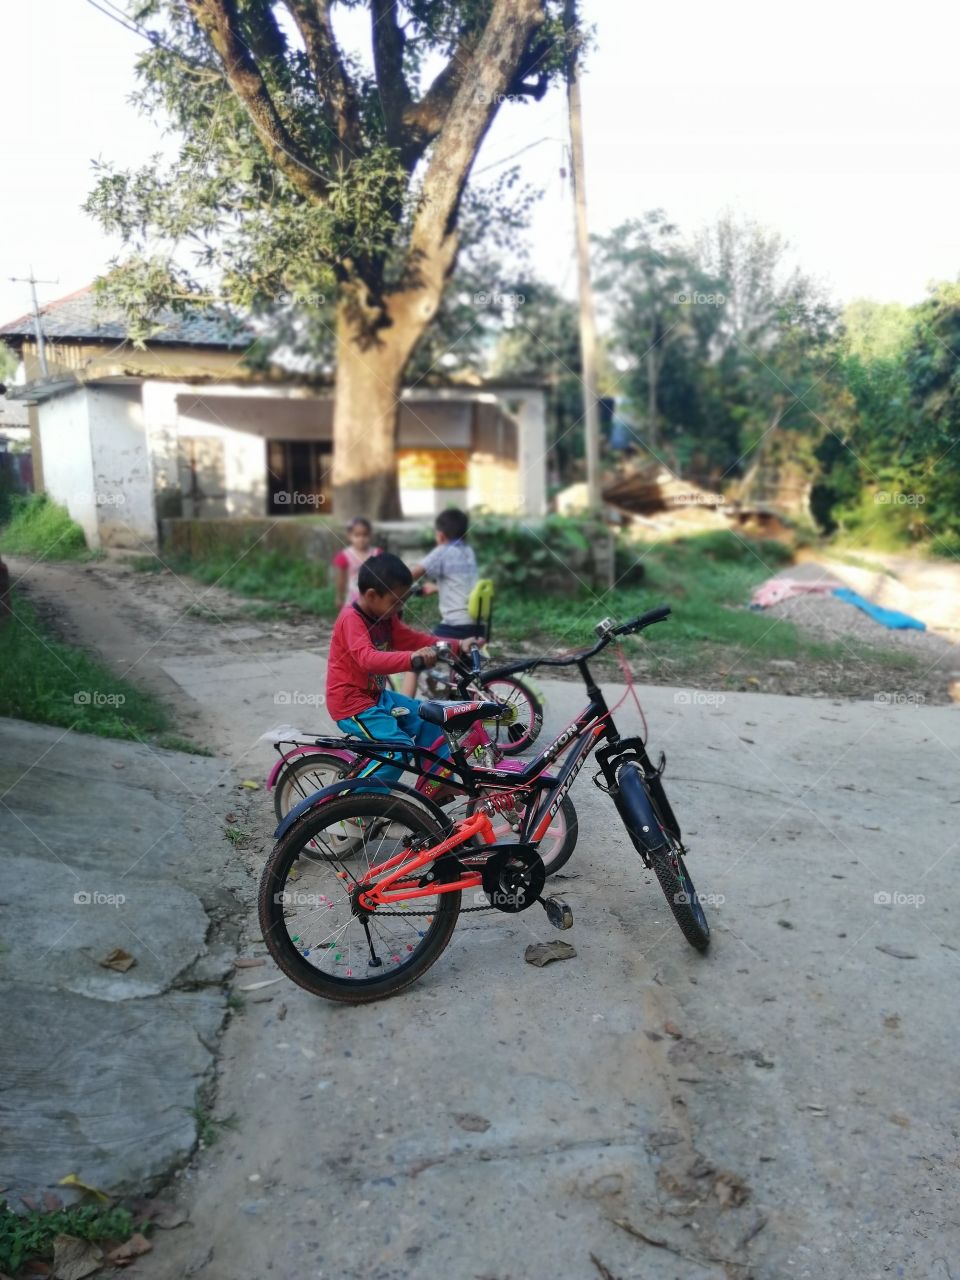 Kids are playing with their bicycle and enjoying childhood in native village.